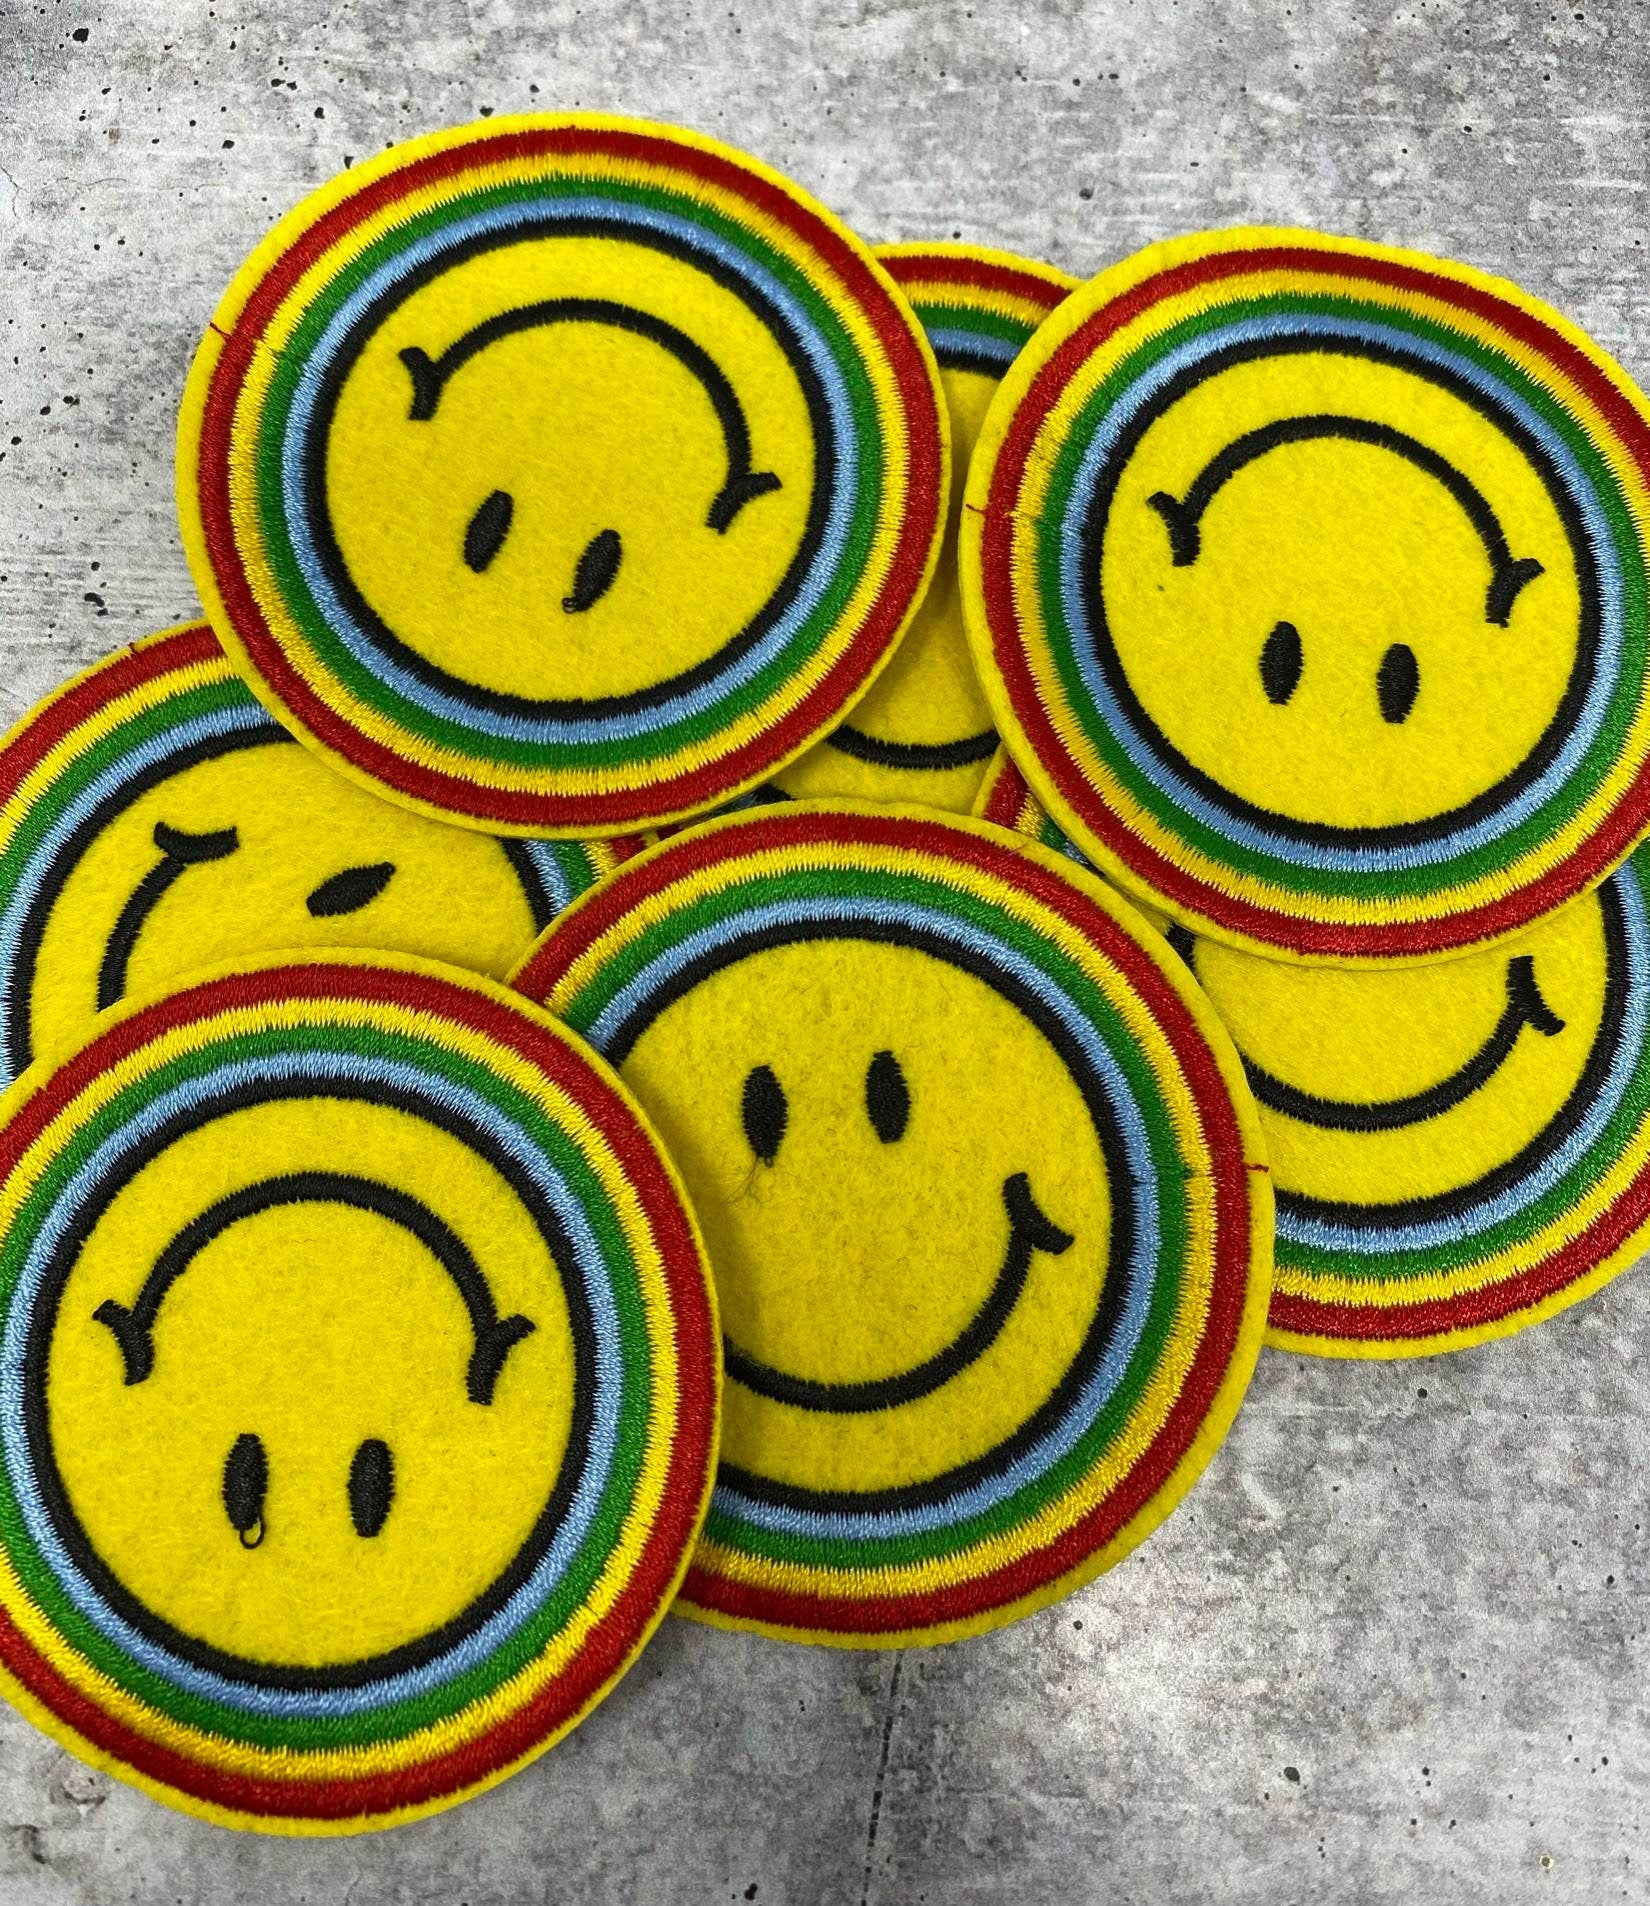 Super Happy "Smily Face Emoji" Circular Patch, Embroidered Iron On Patch, Fashion Patch for Clothing, 3-inch x 3-inch badge